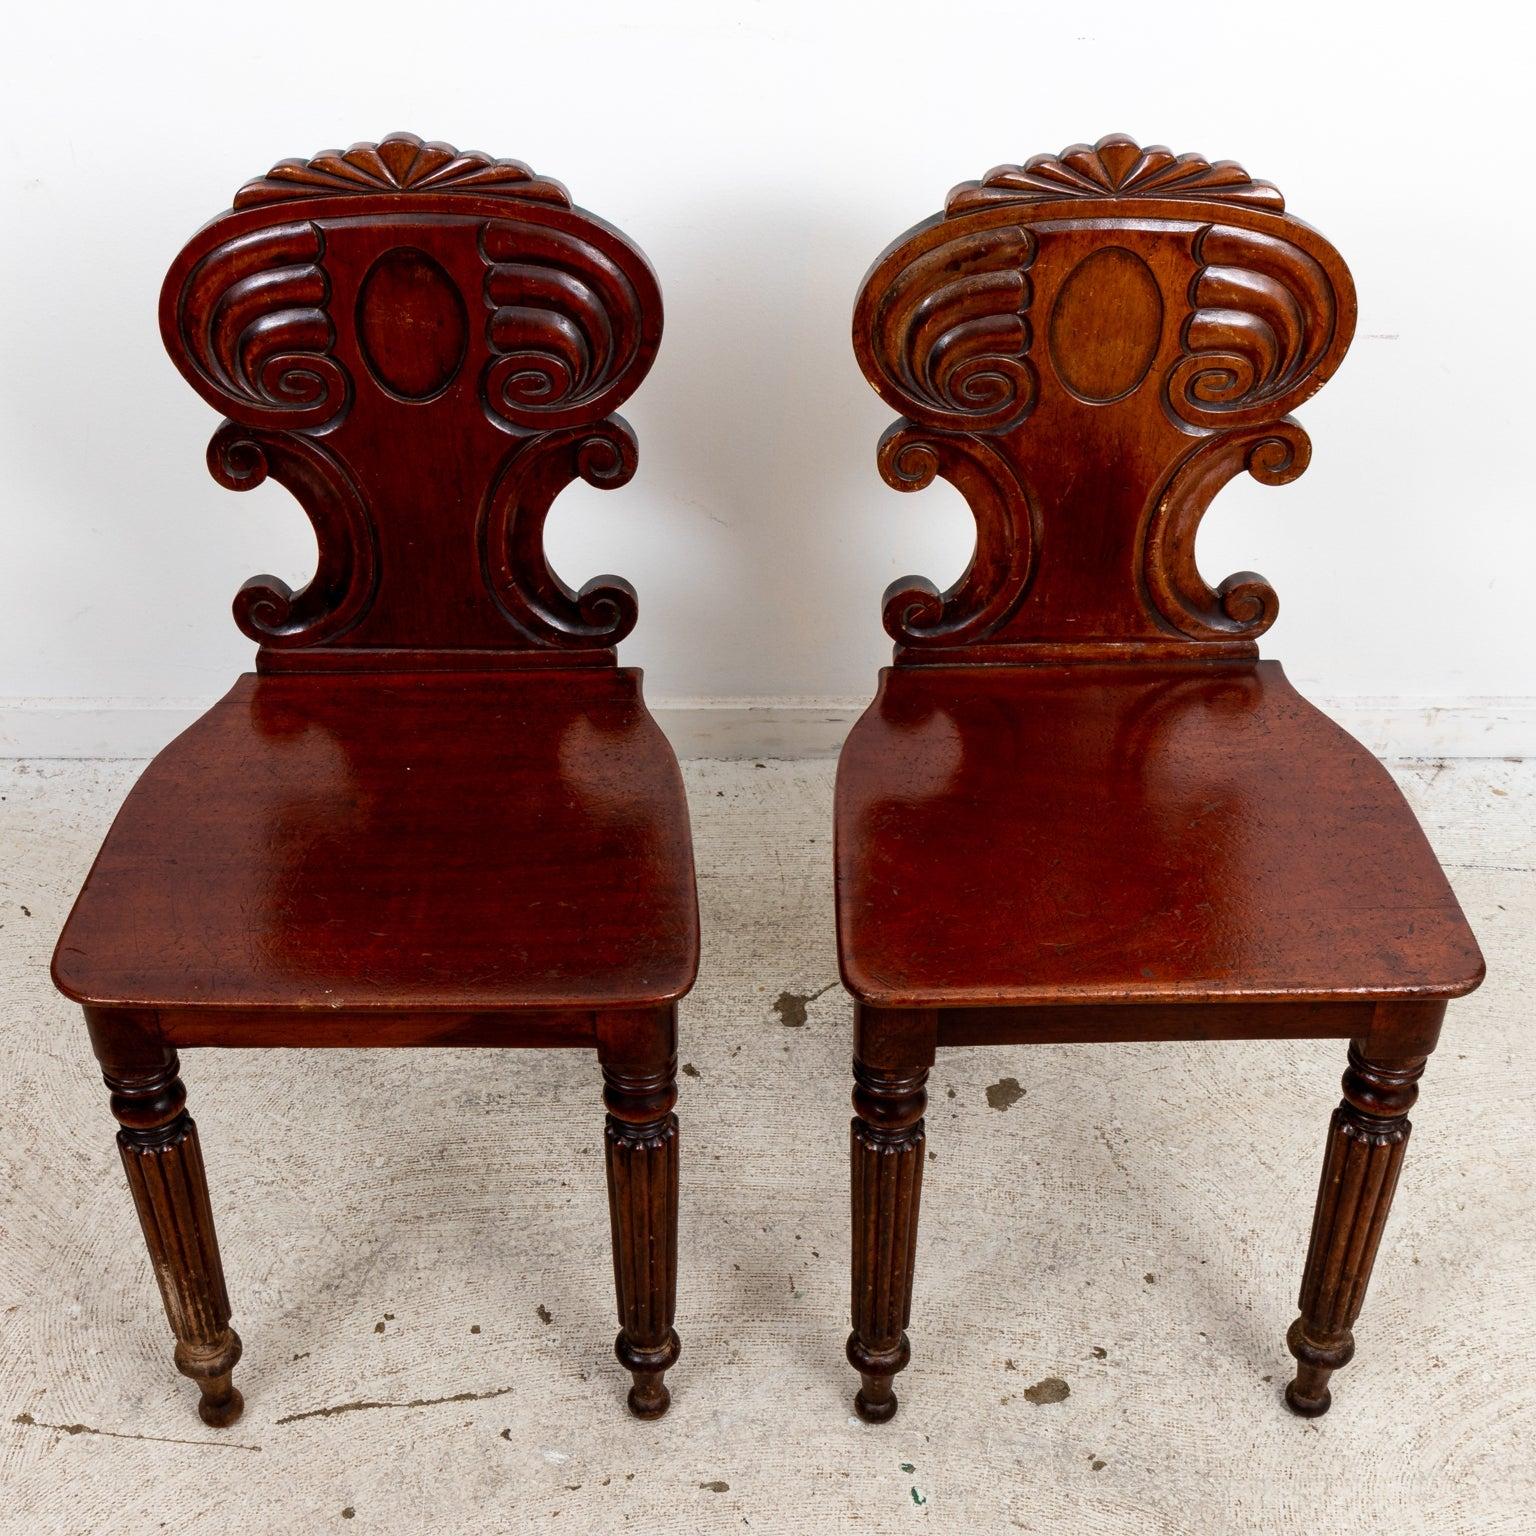 Carved Pair of William IV Style Walnut Hall Chairs